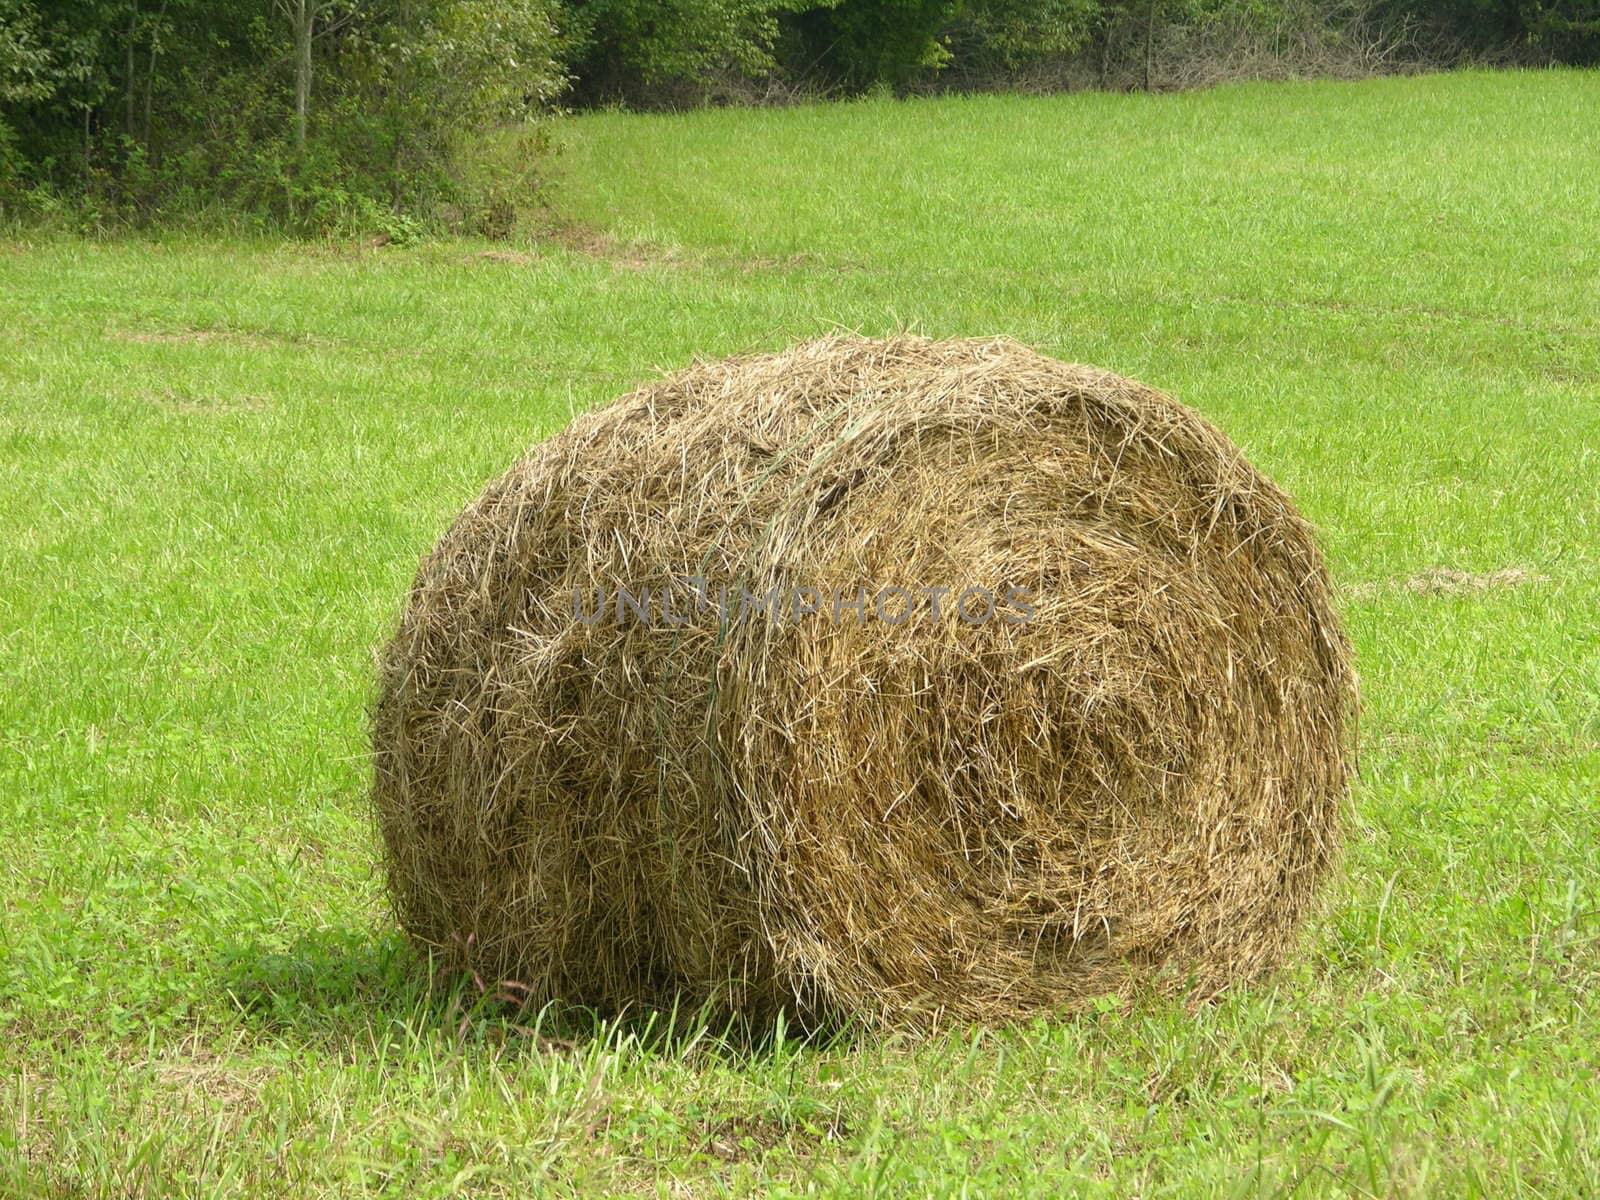 A round hay bale sitting in the field ready for pickup